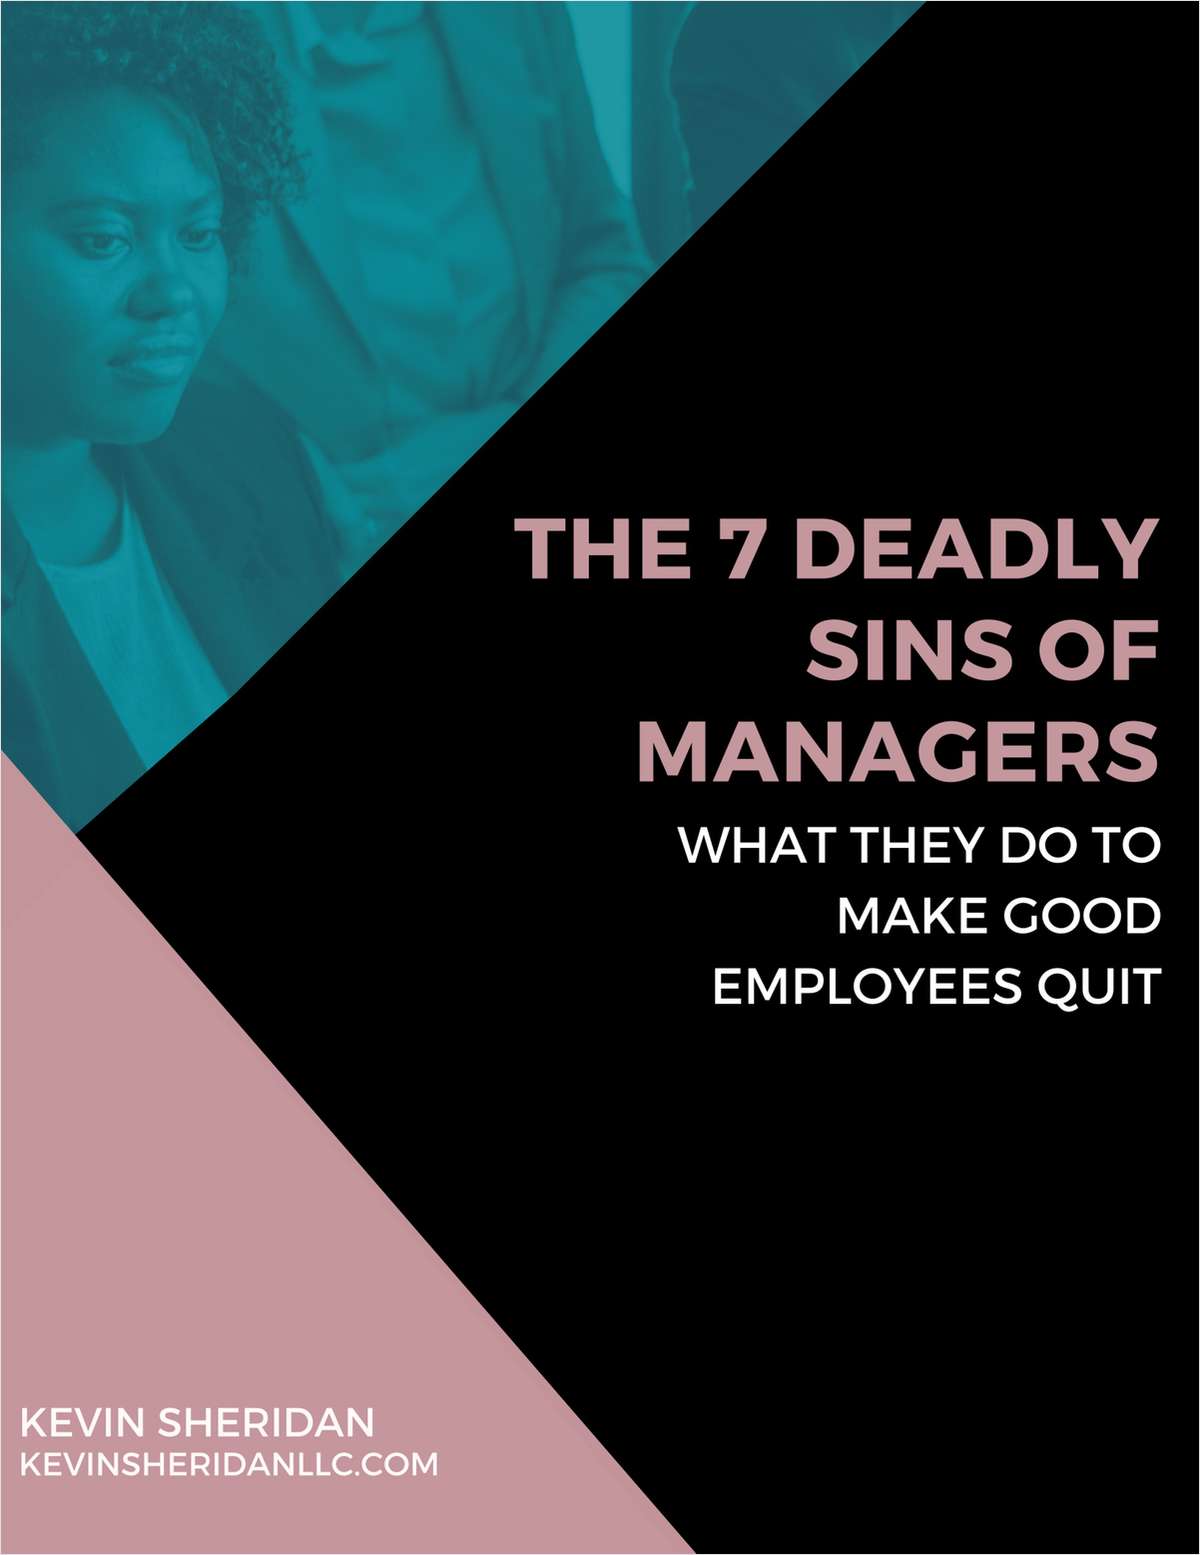 The 7 Deadly Sins of Managers - What They Do to Make Good Employees Quit